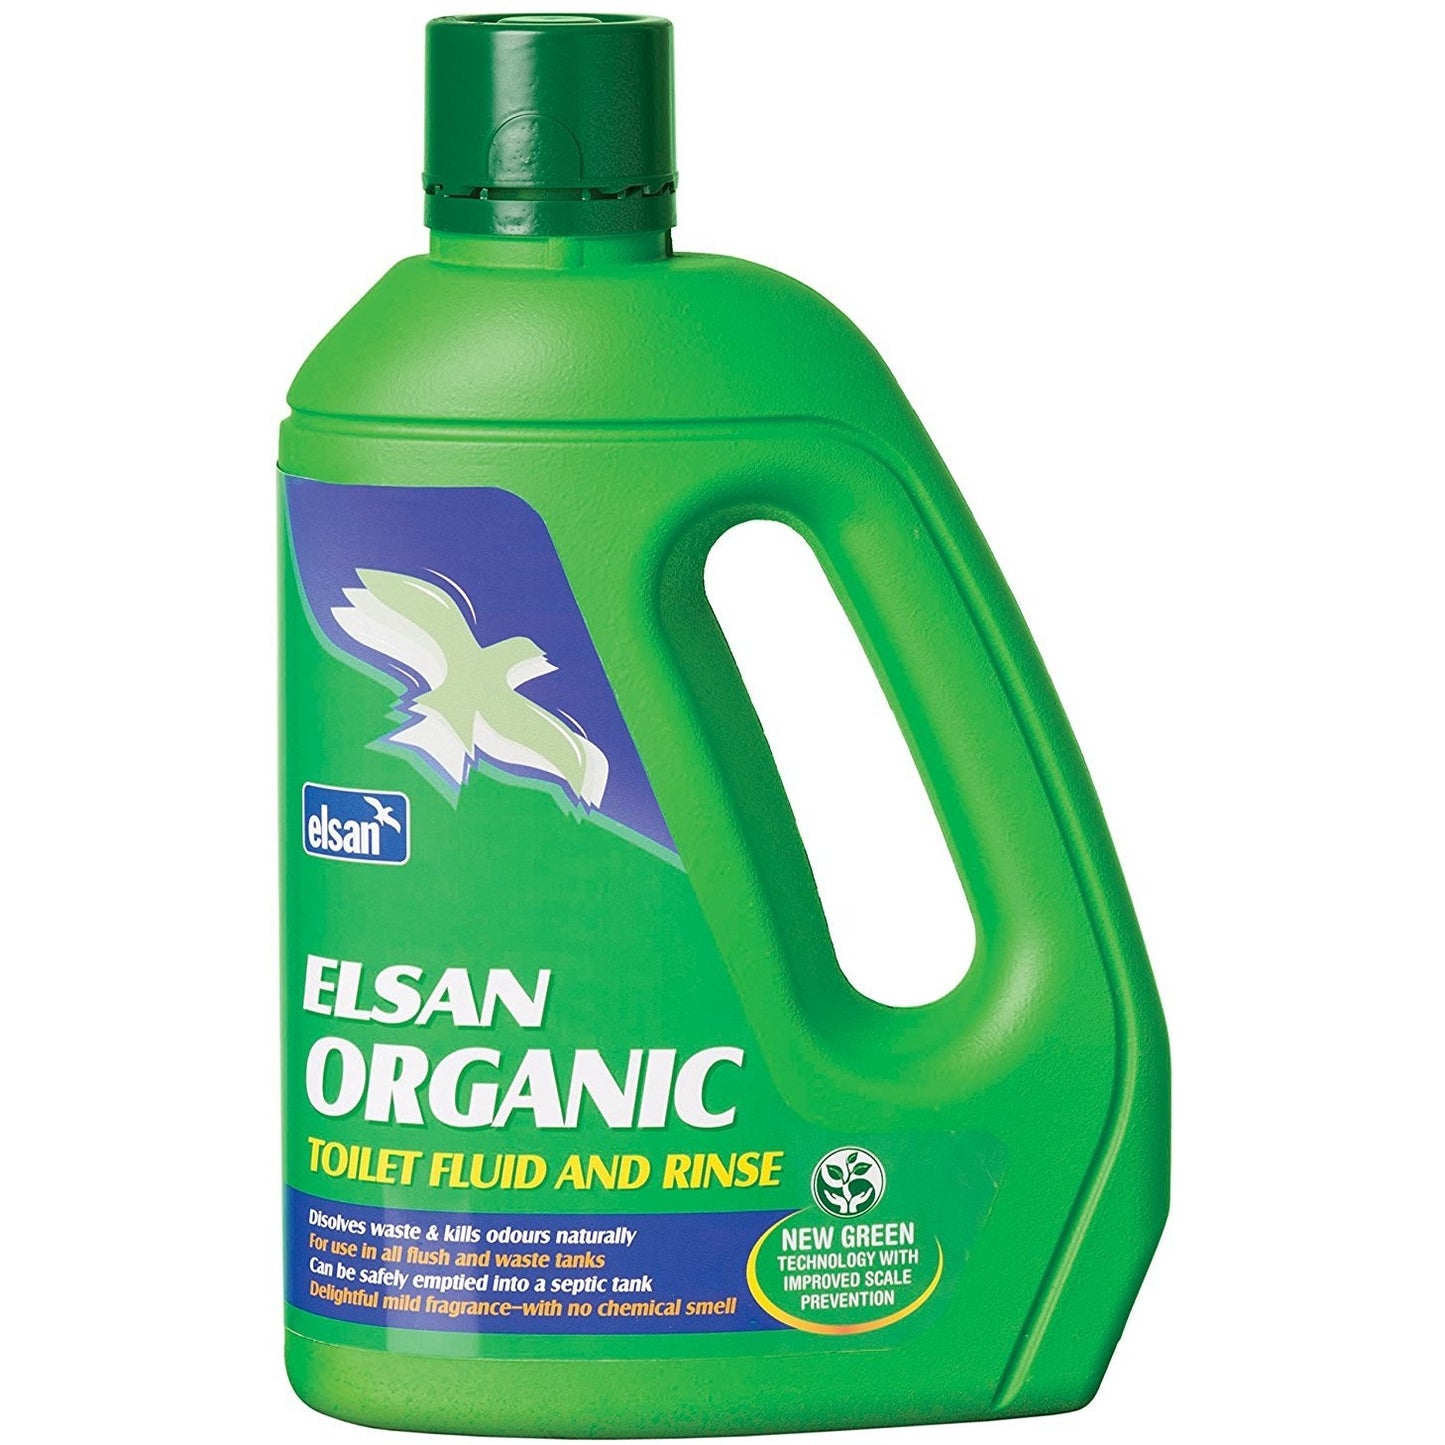 Elsan Organic Toilet Fluid - 2L - AVAILABLE IN STORE ONLY